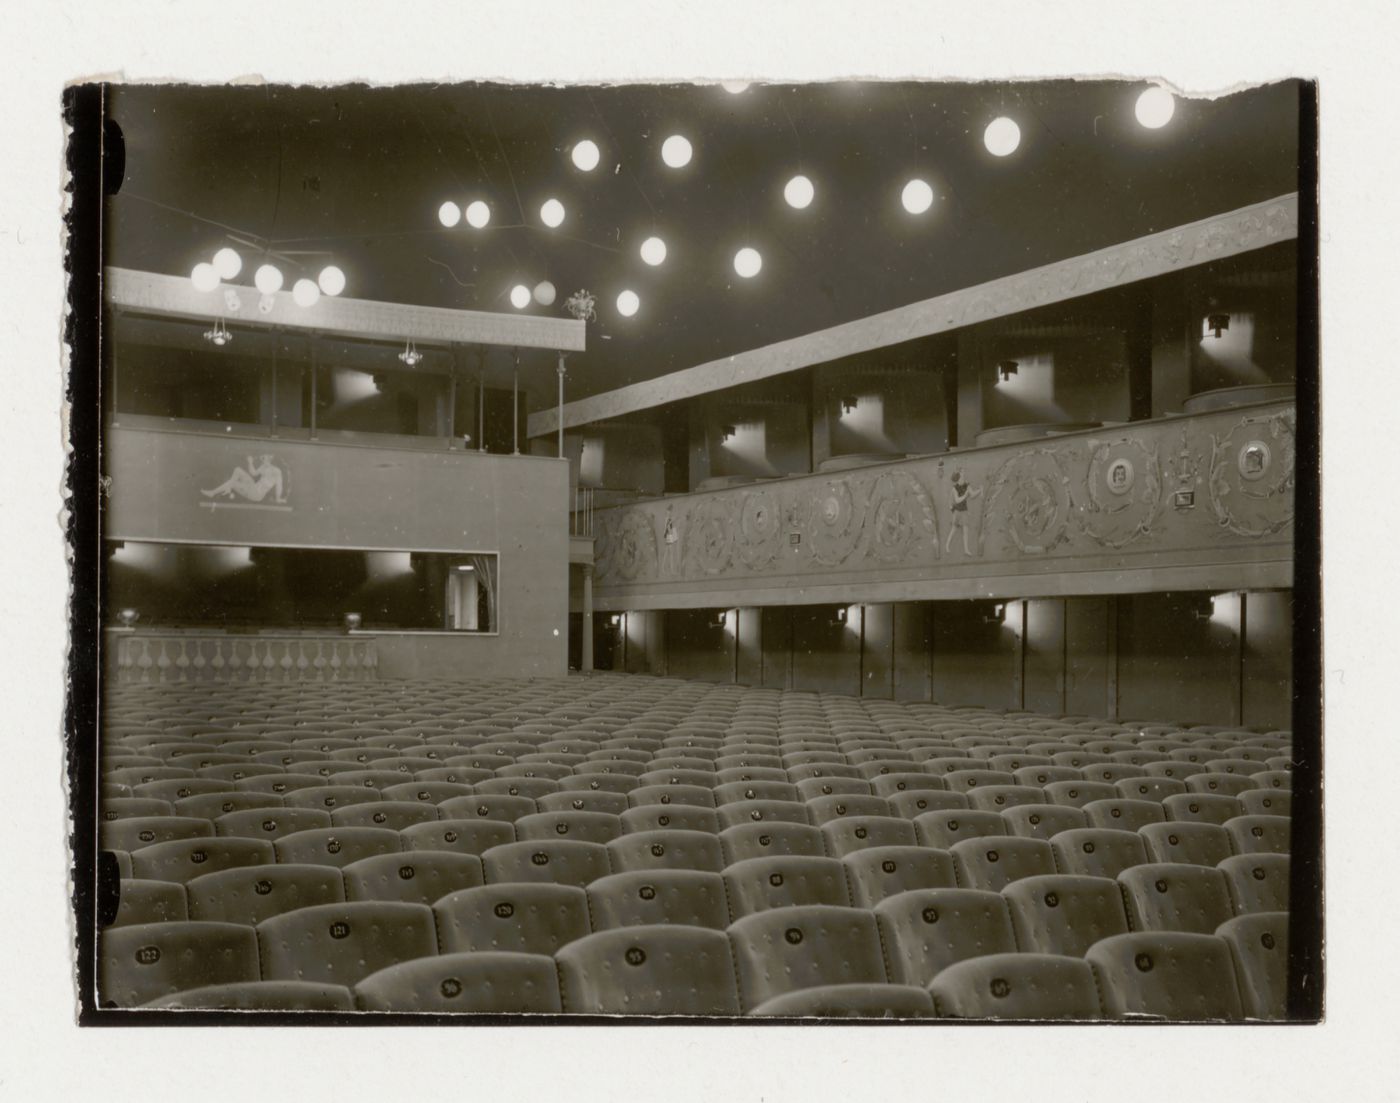 Interior view of Skandia Cinema showing the gallery and rear balcony, Stockholm